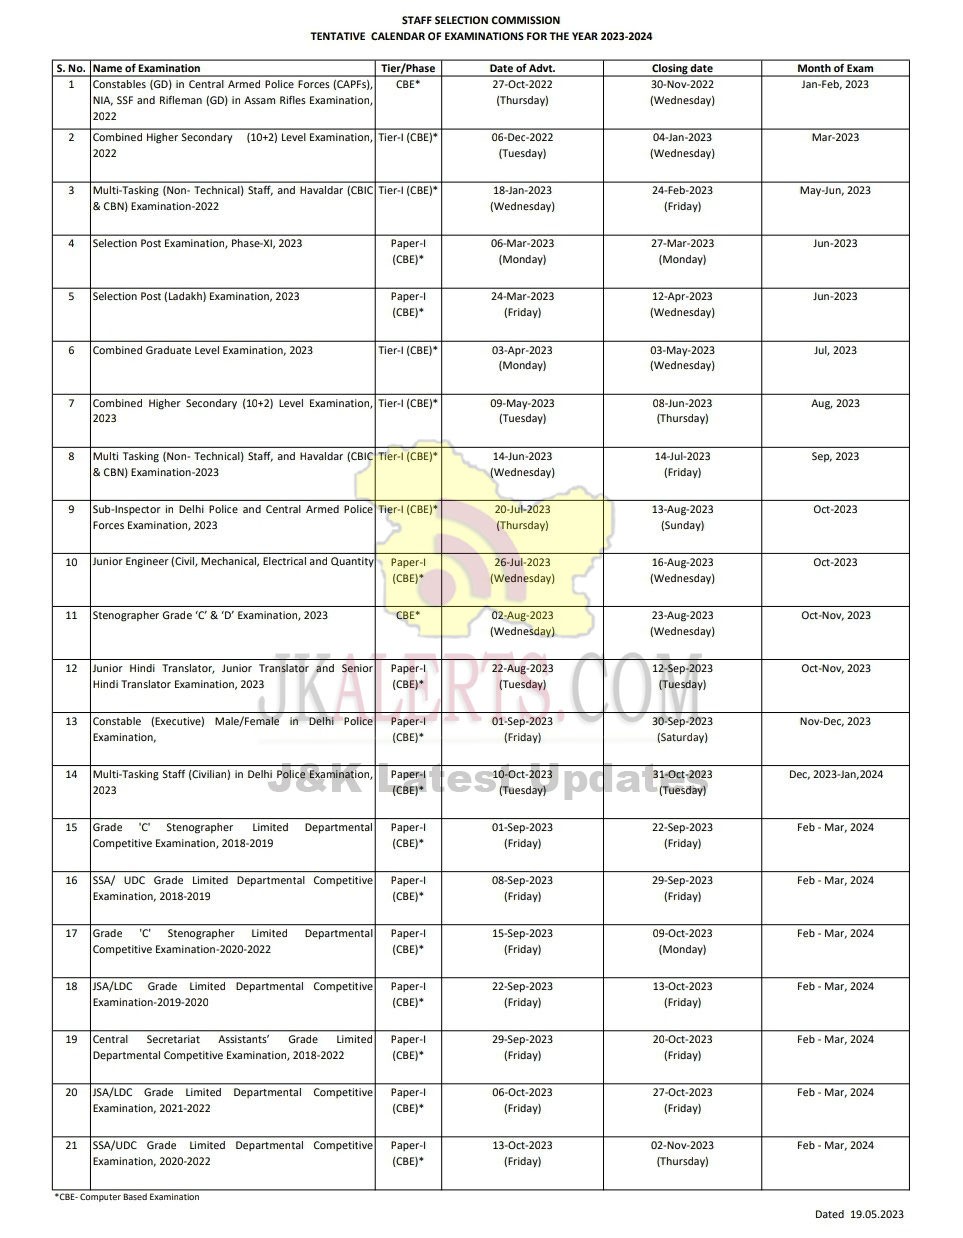 SSC Revised Calendar of Exams for the year 20232024.